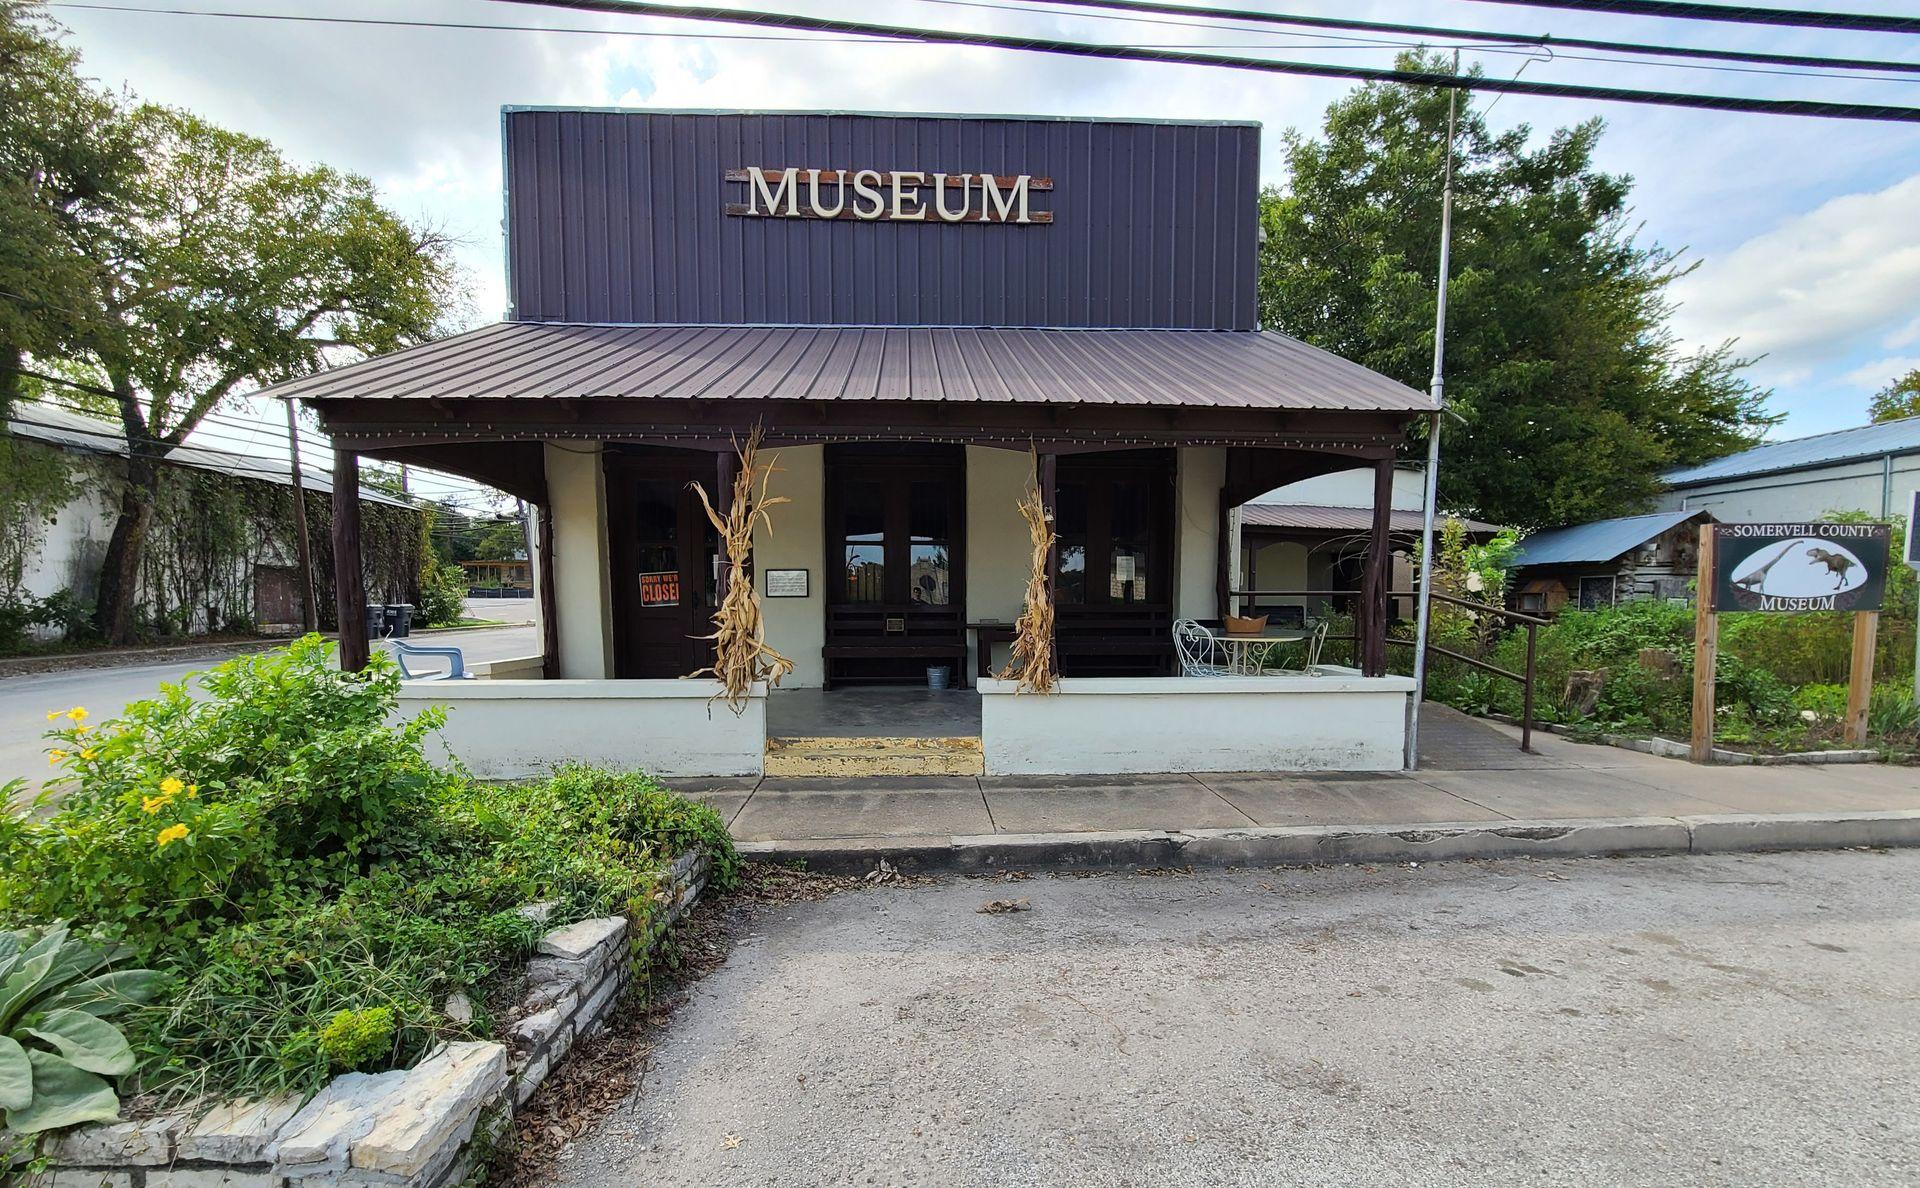 A small building labeled 'museum' with some green plants in the front and the on right side.